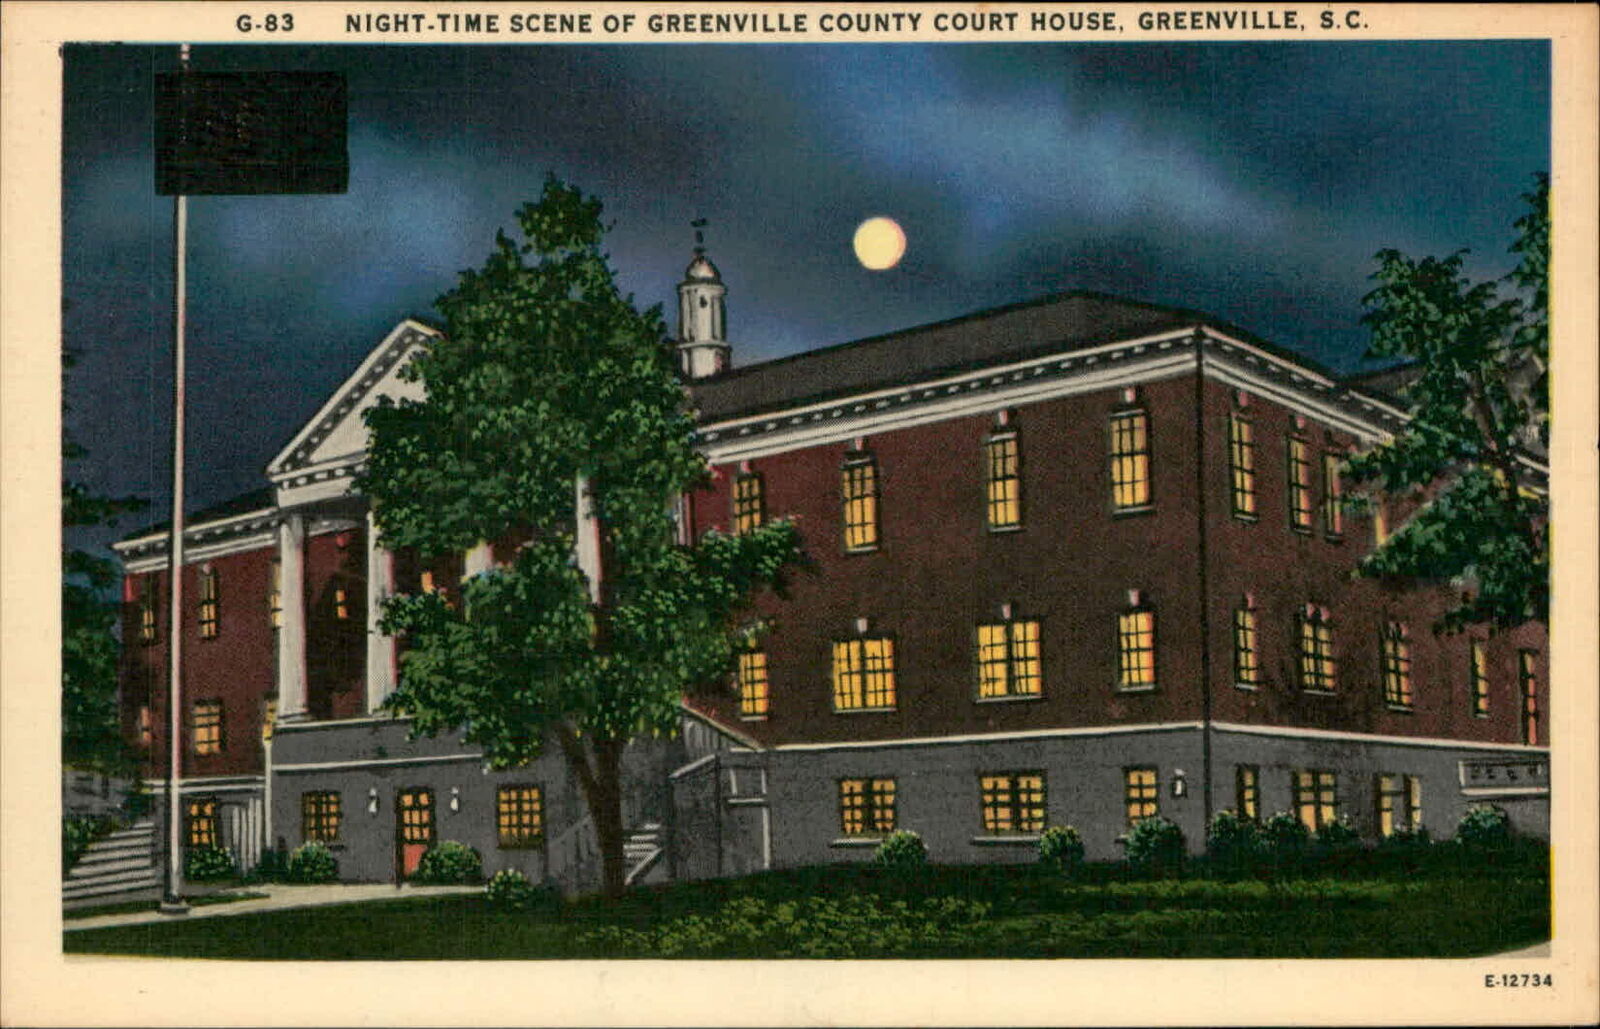 Postcard: G-83 NIGHT-TIME SCENE OF GREENVILLE COUNTY COURT HOUSE, GREE